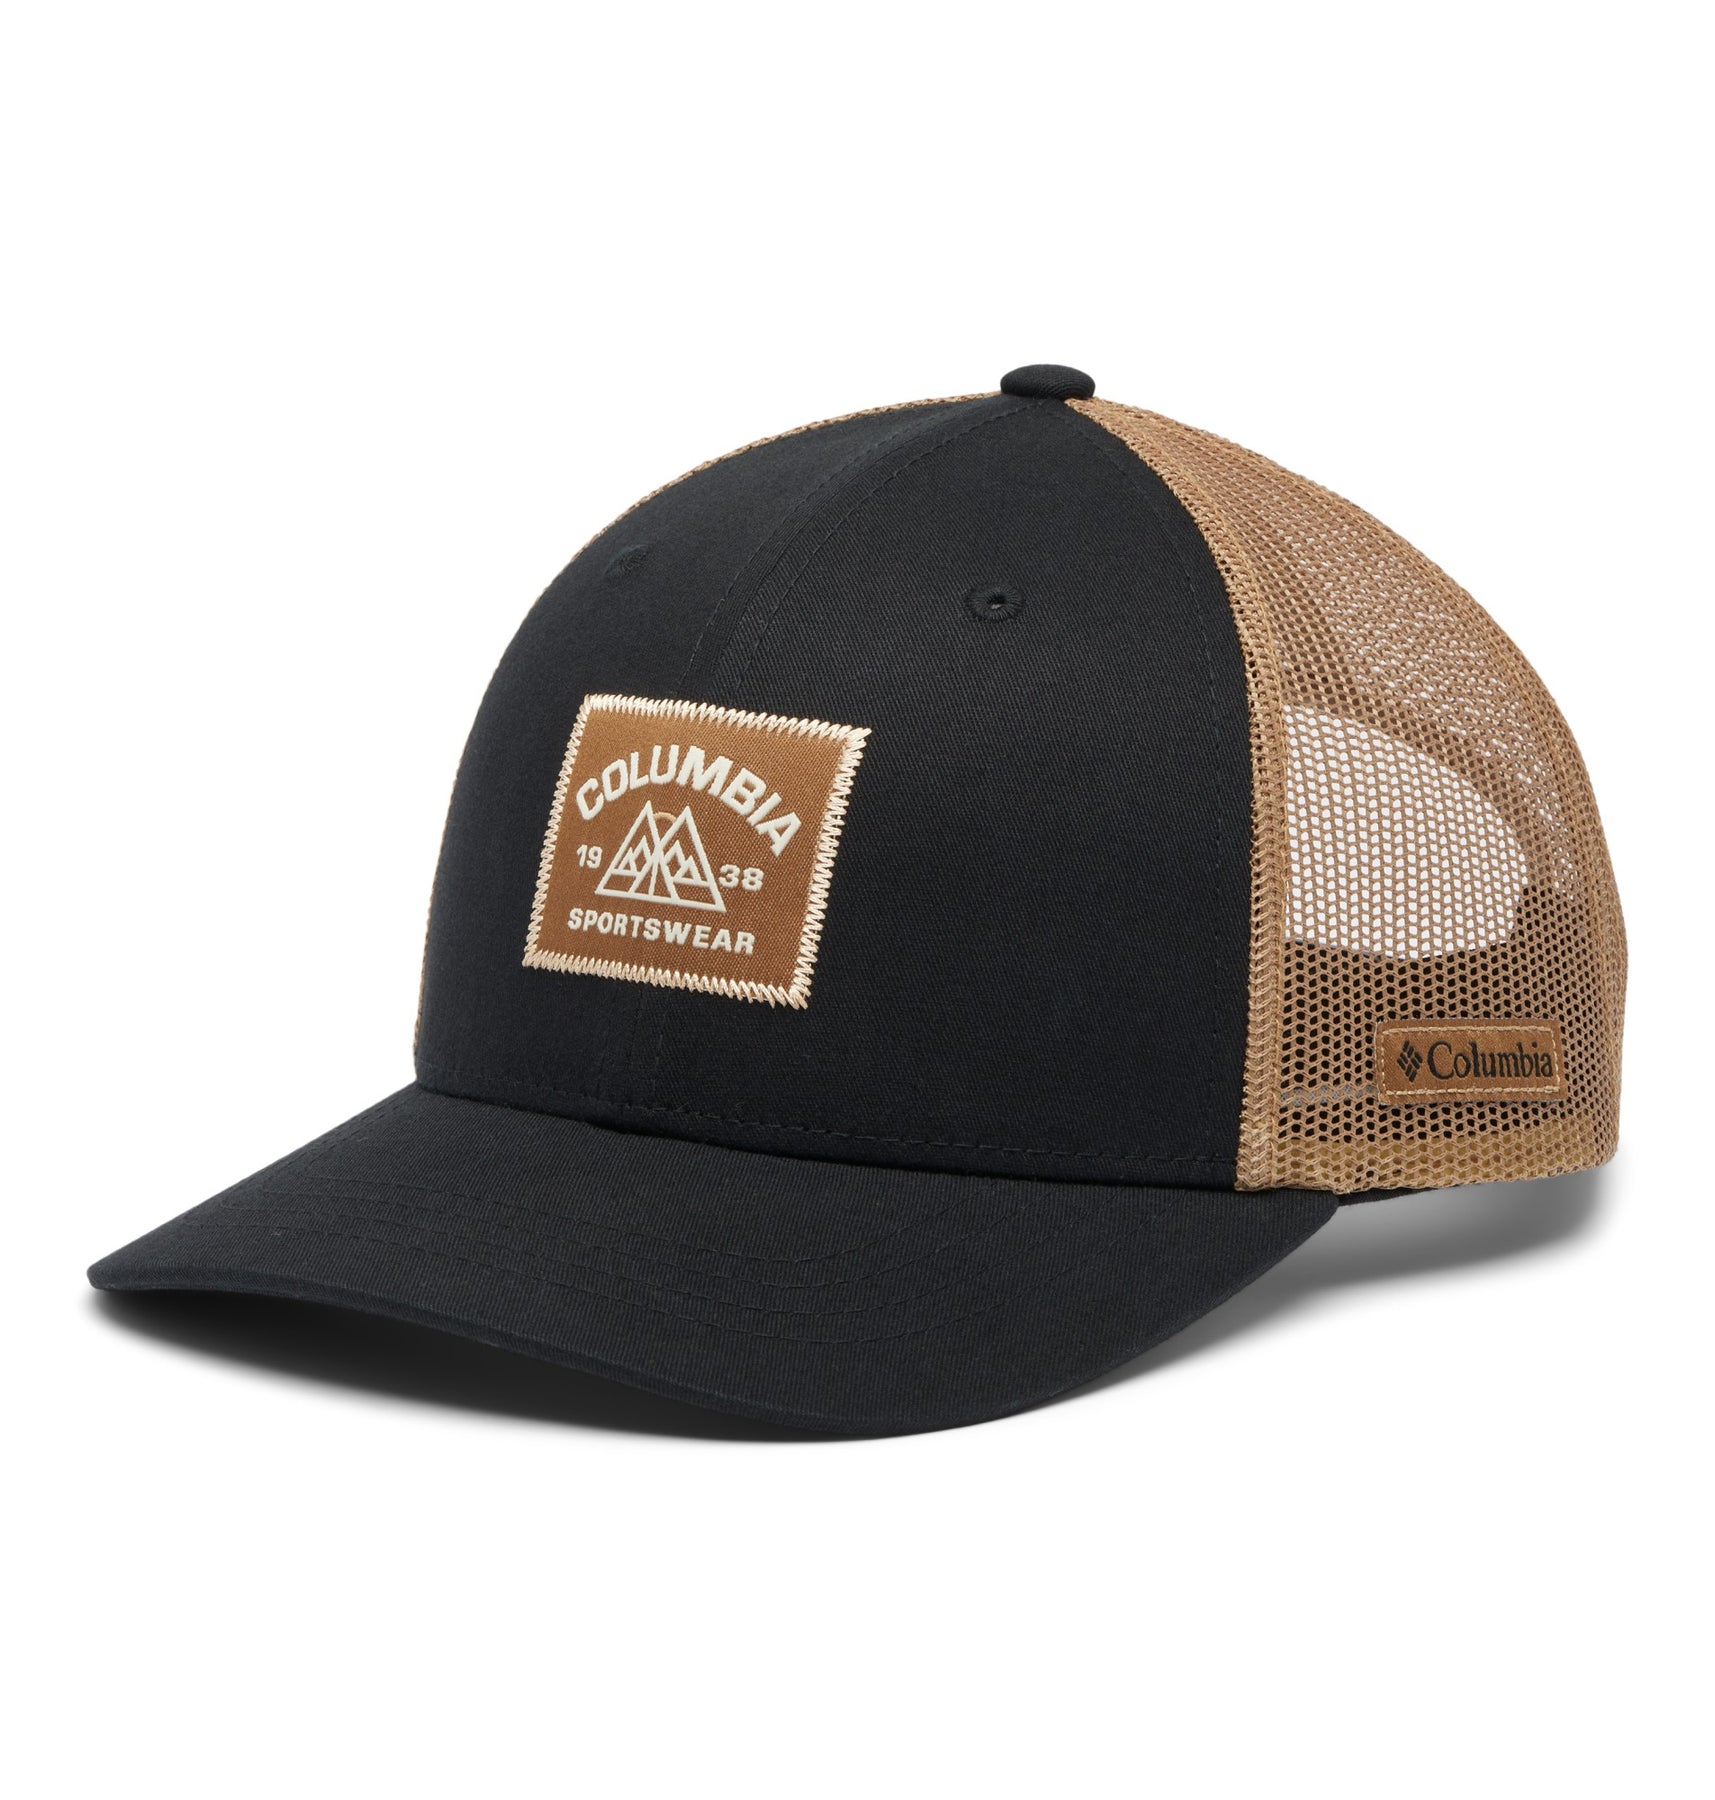 Columbia Youth Snap Back - Kids